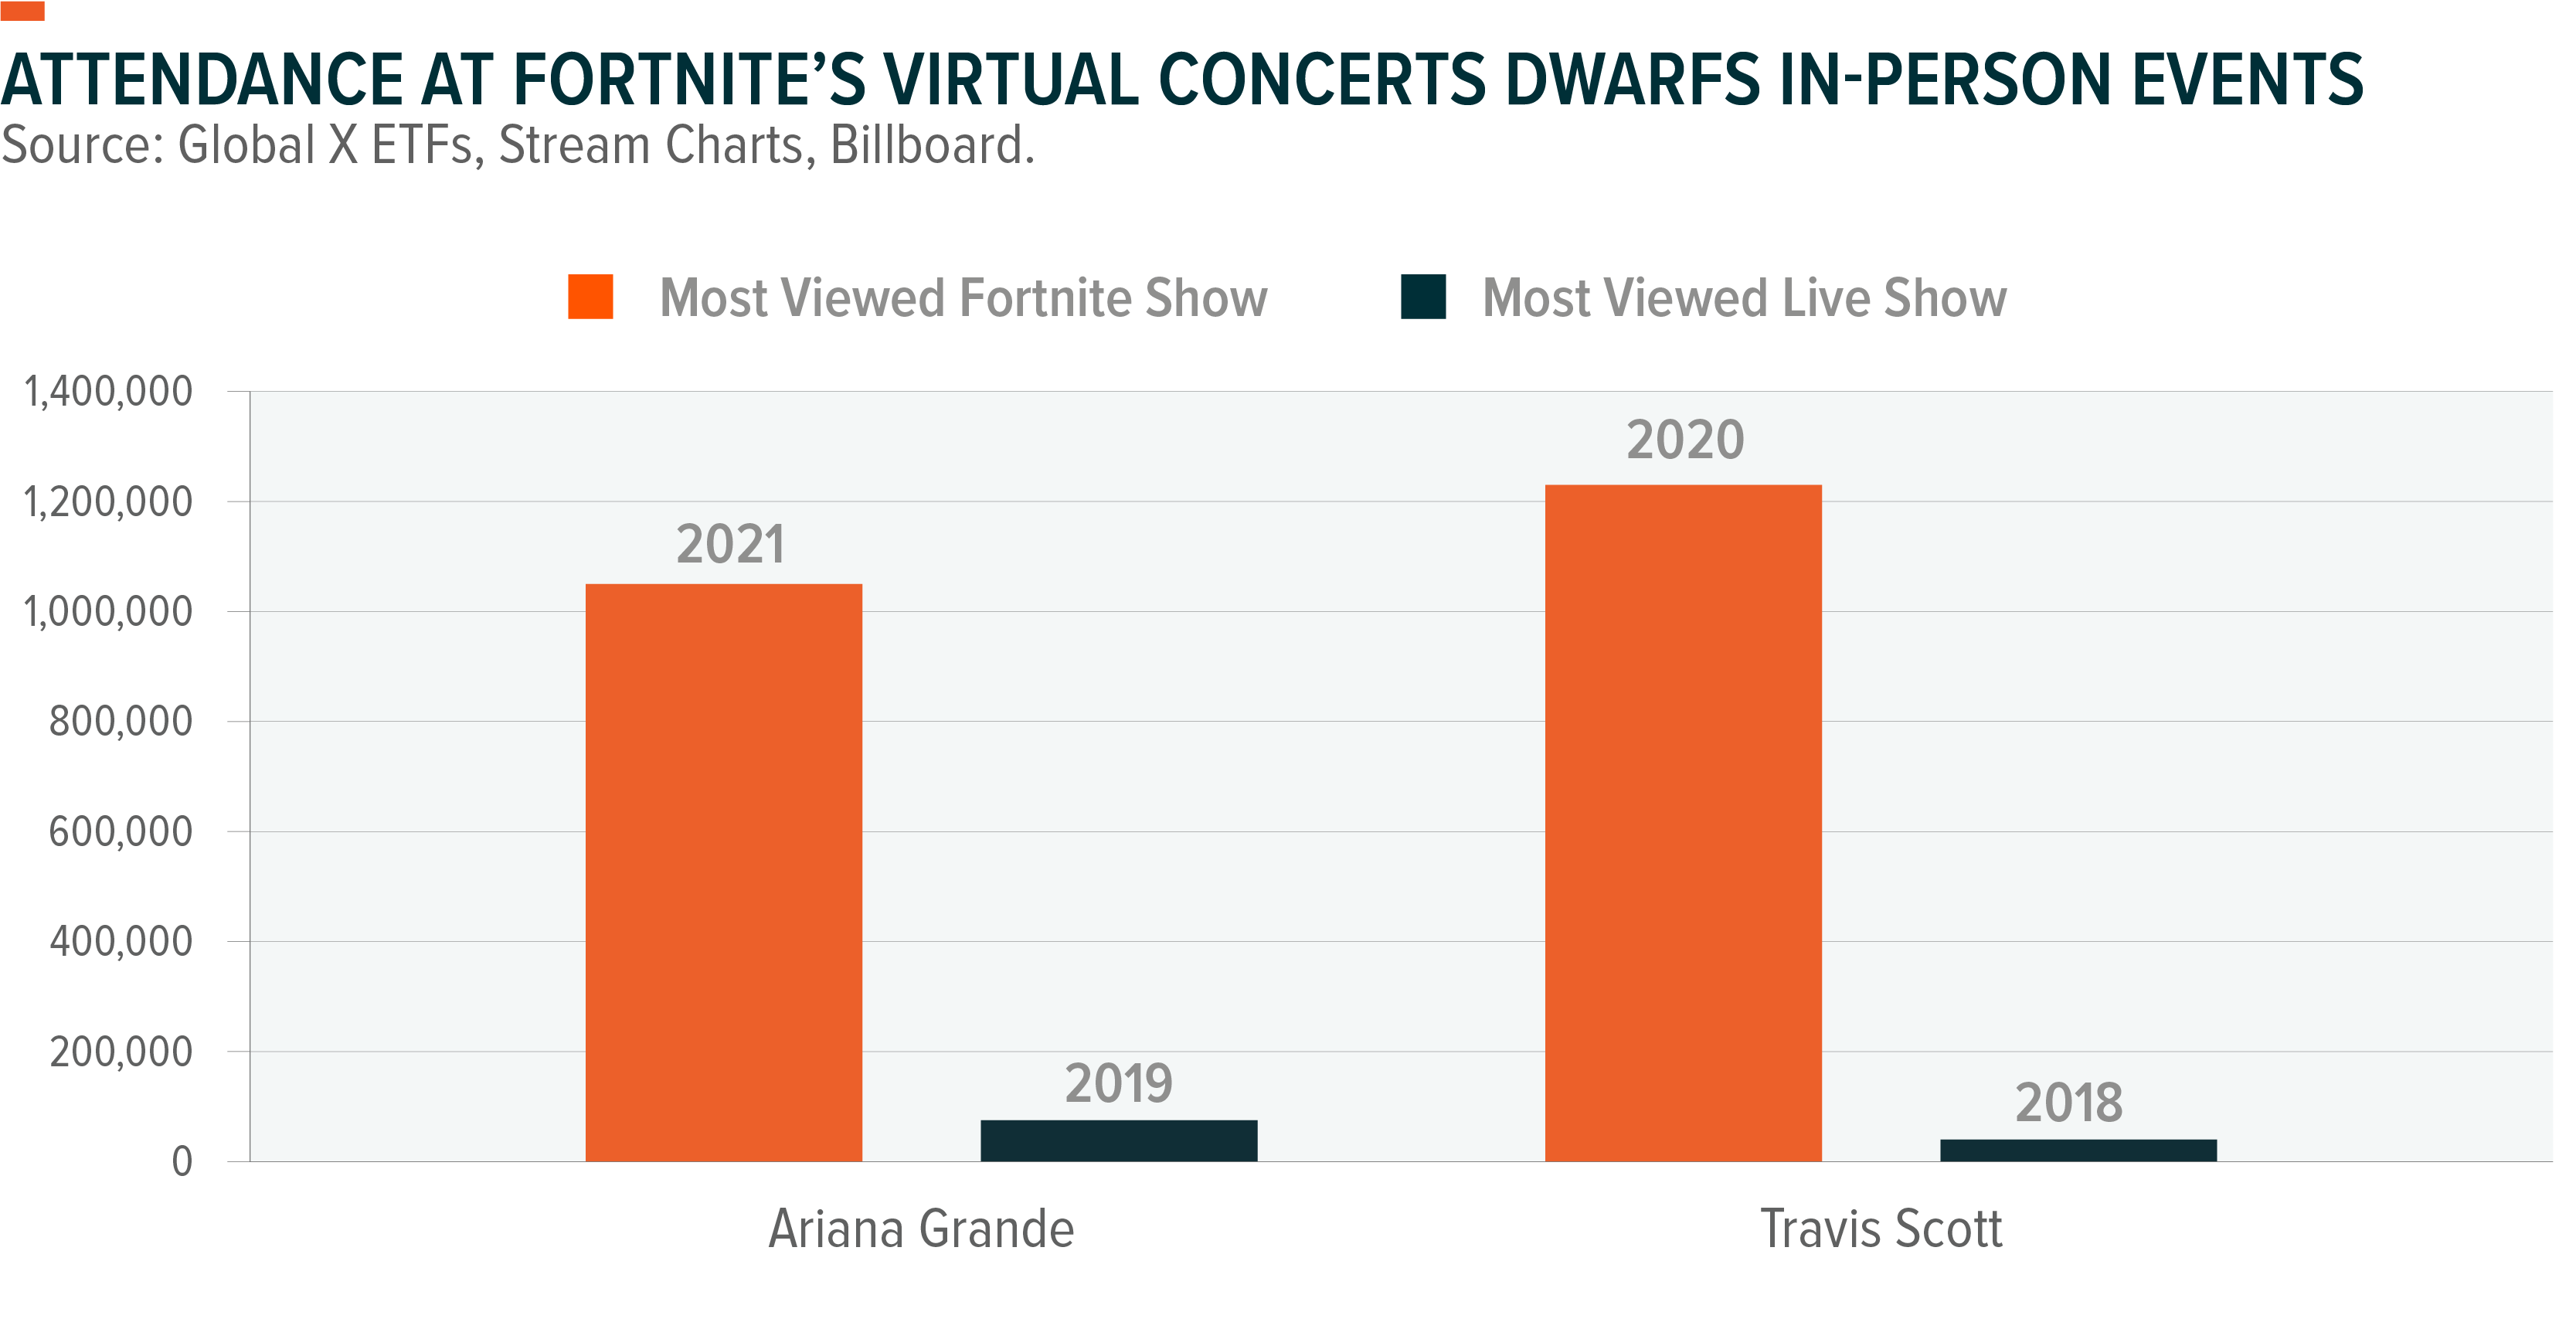 Attendance at Fortnite's Virtual Concerts Dwarfs In-Person Events